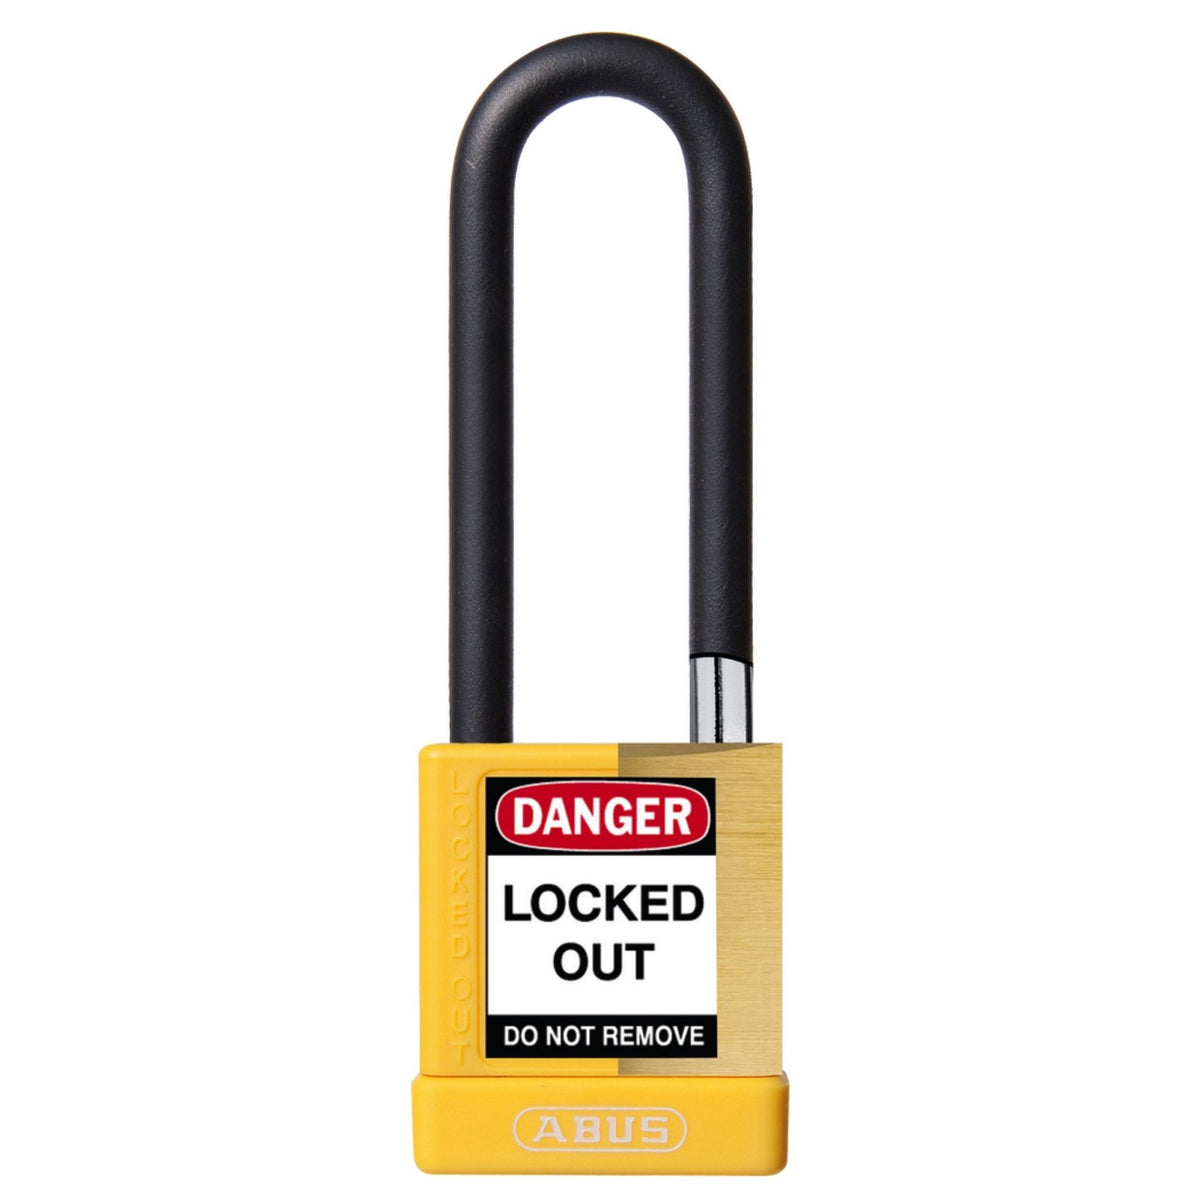 Abus 74M/40HB75 KDx3 Yellow Insulated Brass Safety Padlock with 3-Inch Shackle Keyed in Set-of-3 Padlocks - The Lock Source